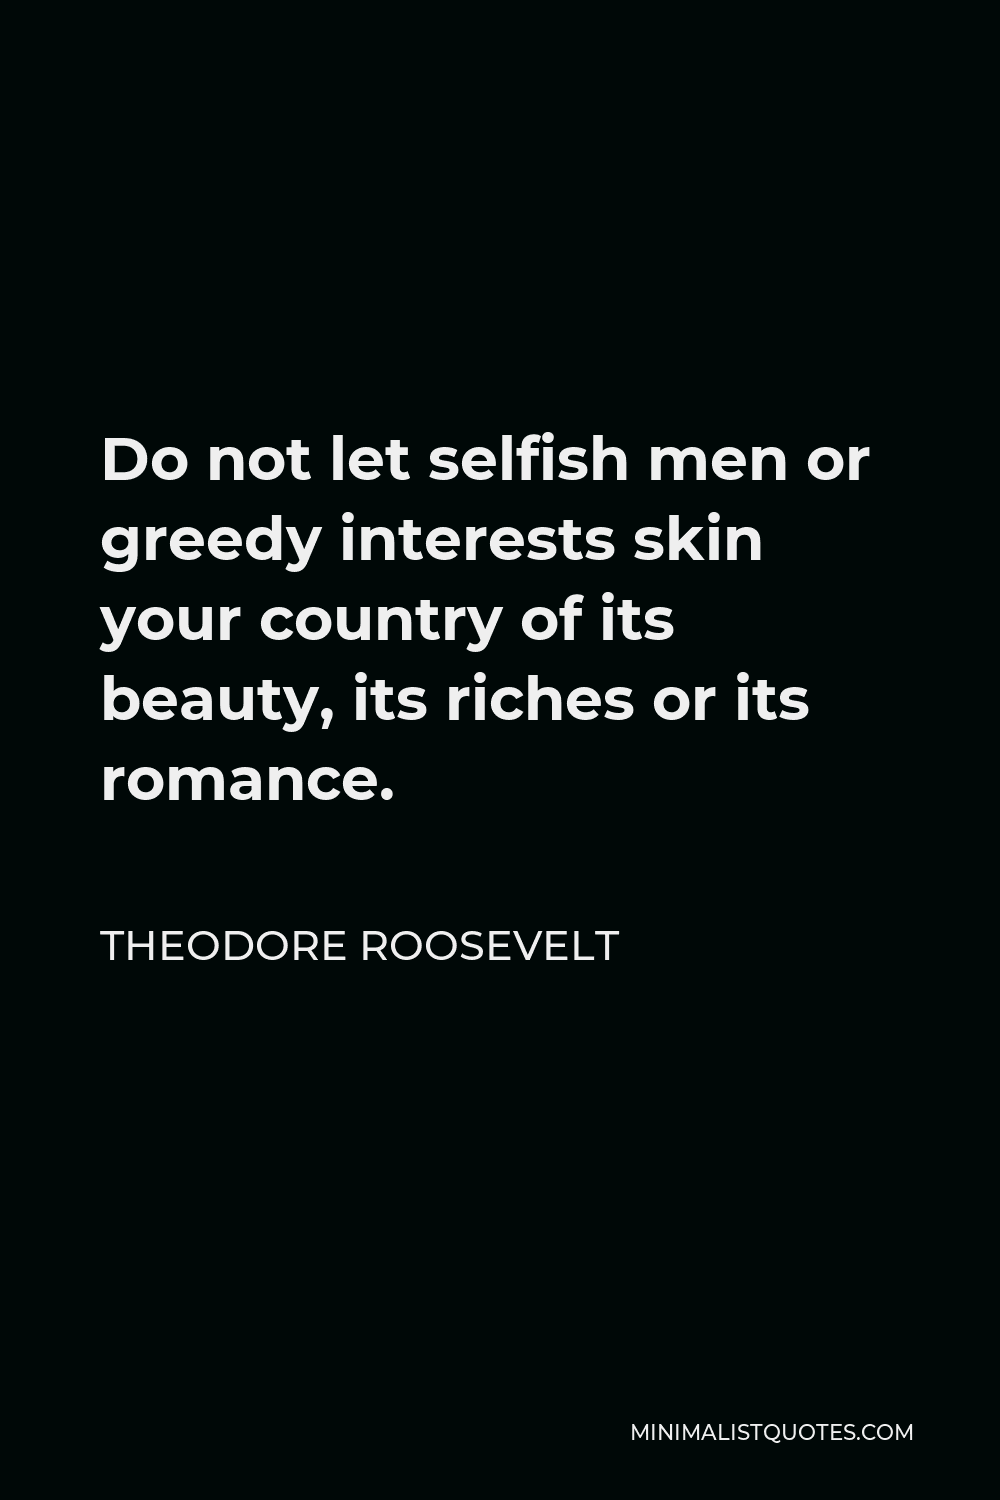 Theodore Roosevelt Quote - Do not let selfish men or greedy interests skin your country of its beauty, its riches or its romance.